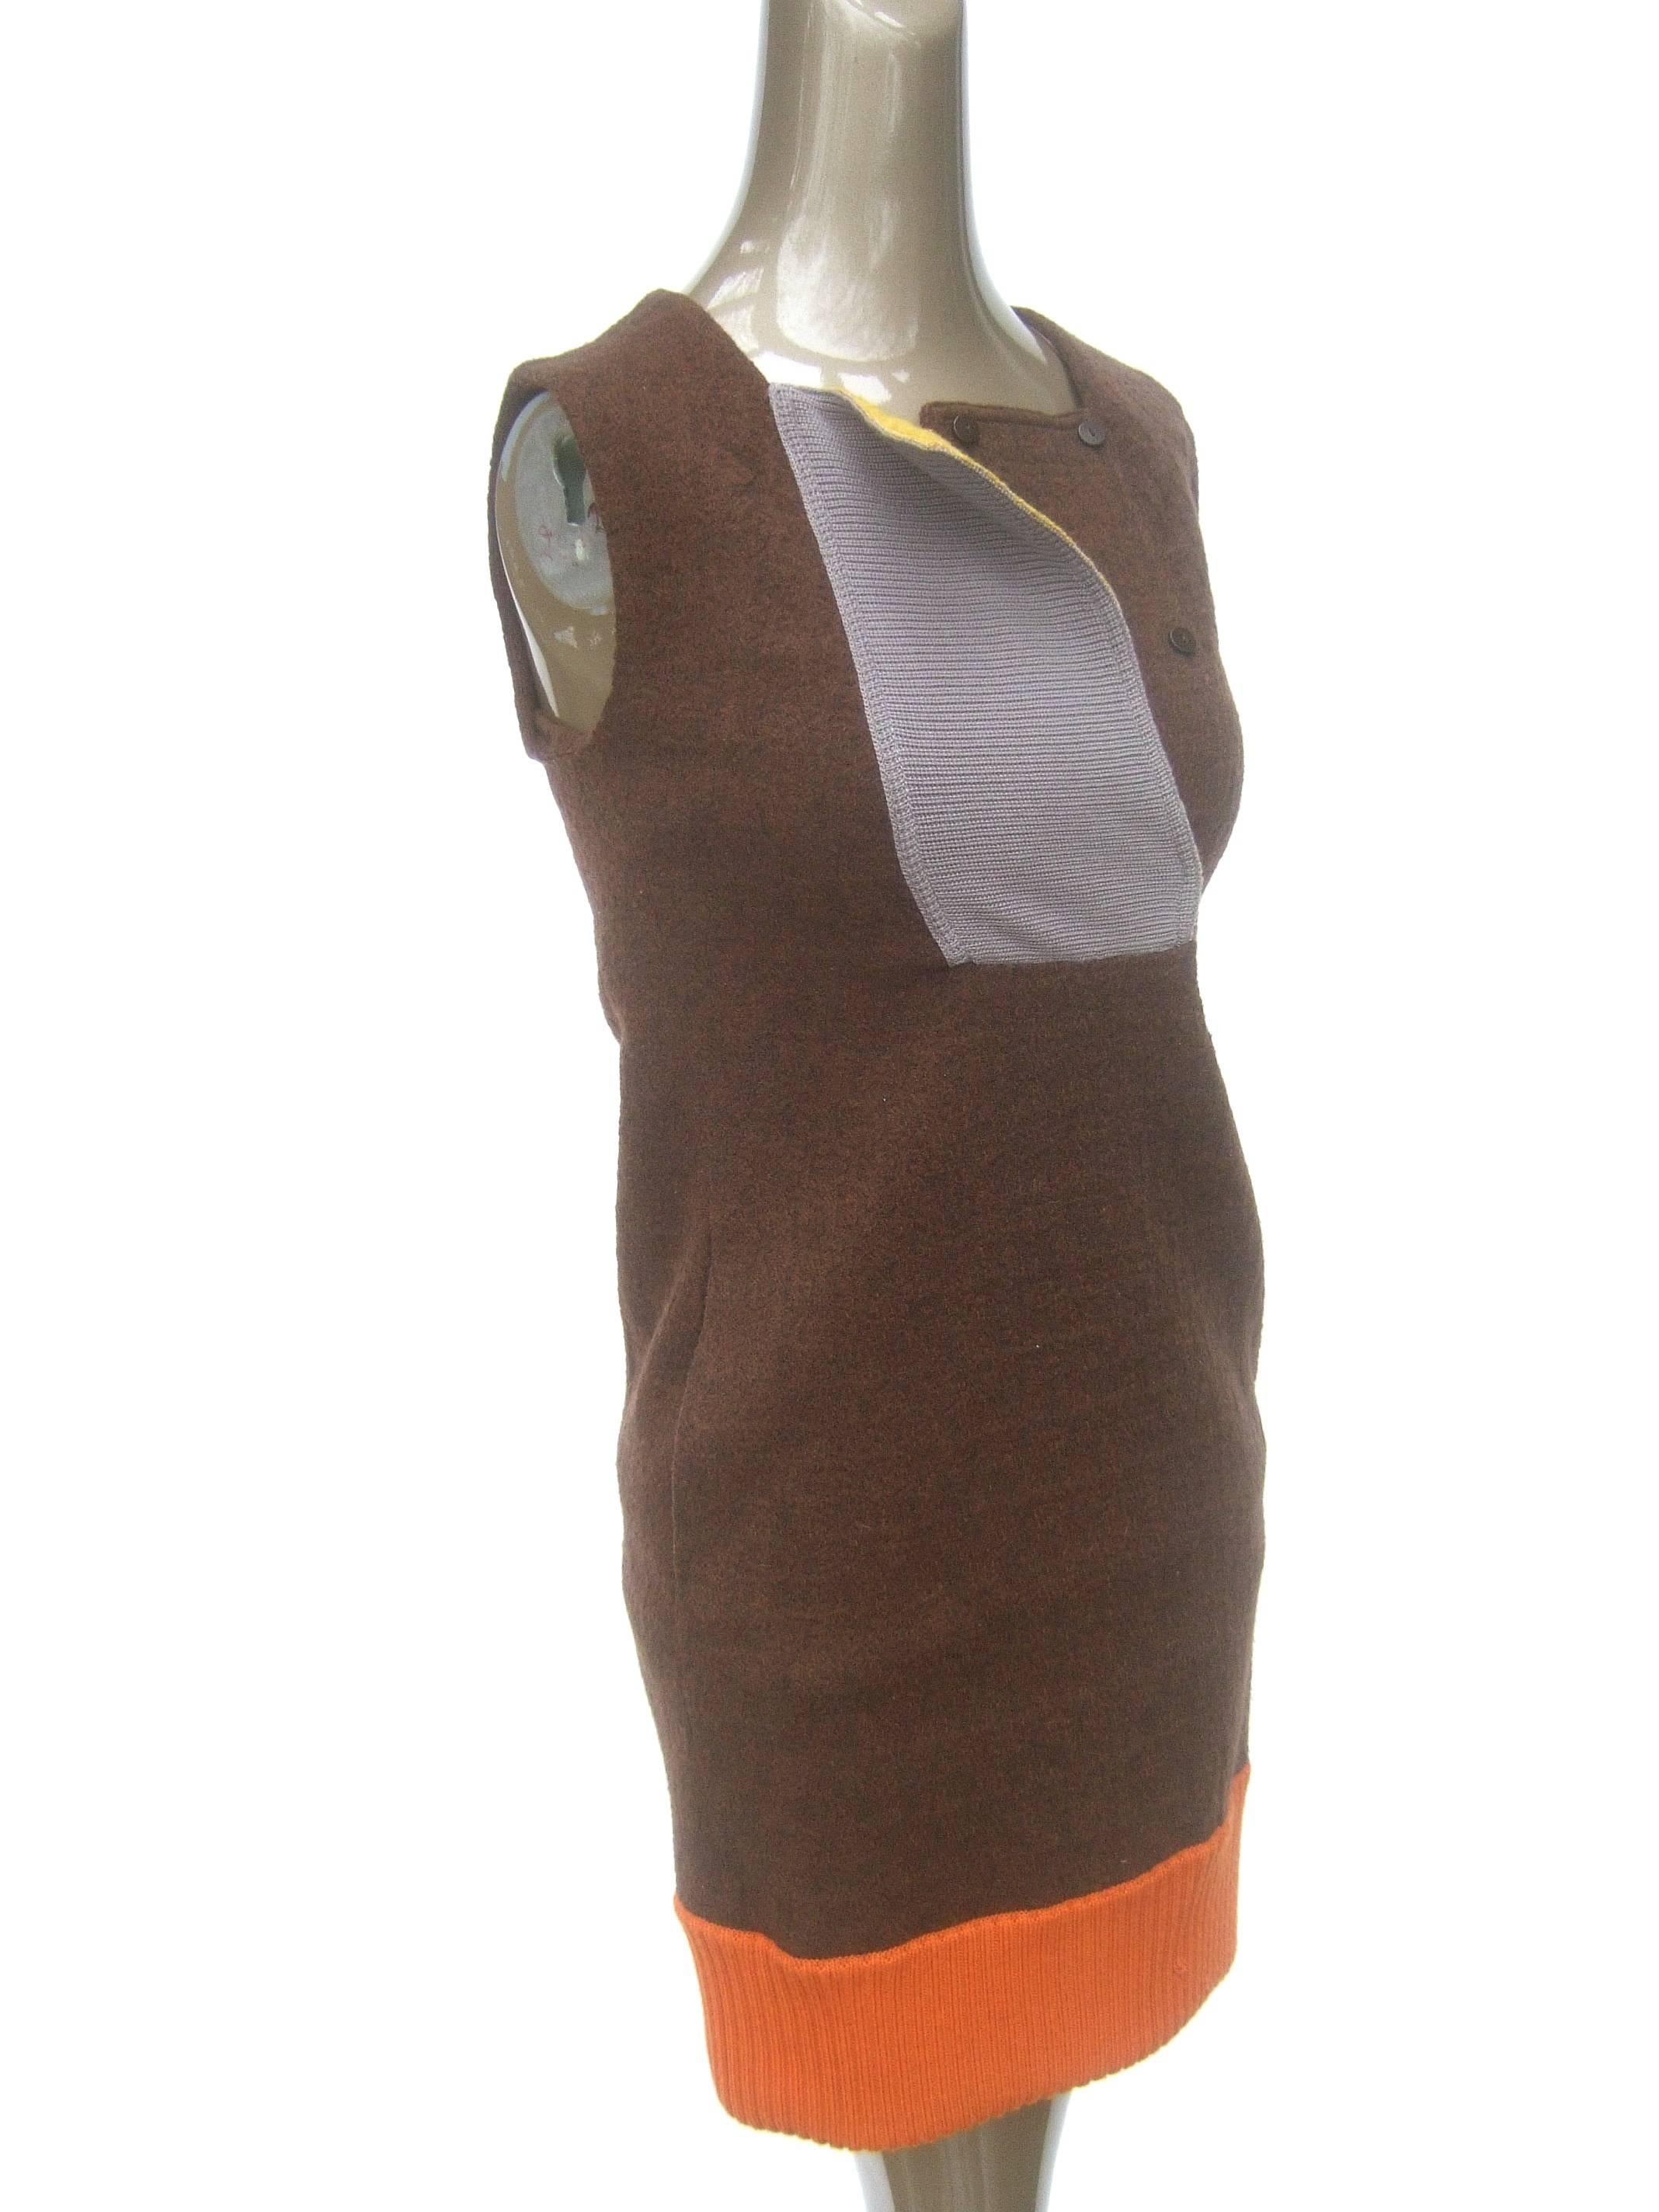 Missoni Italy modern brown wool sleeveless sheath dress Size 38 
The Italian wool dress is designed with a gray wool knit
ribbed panel at the center of the bodice 

The gray ribbed knit panel secures with a set of small 
resin buttons underneath. It